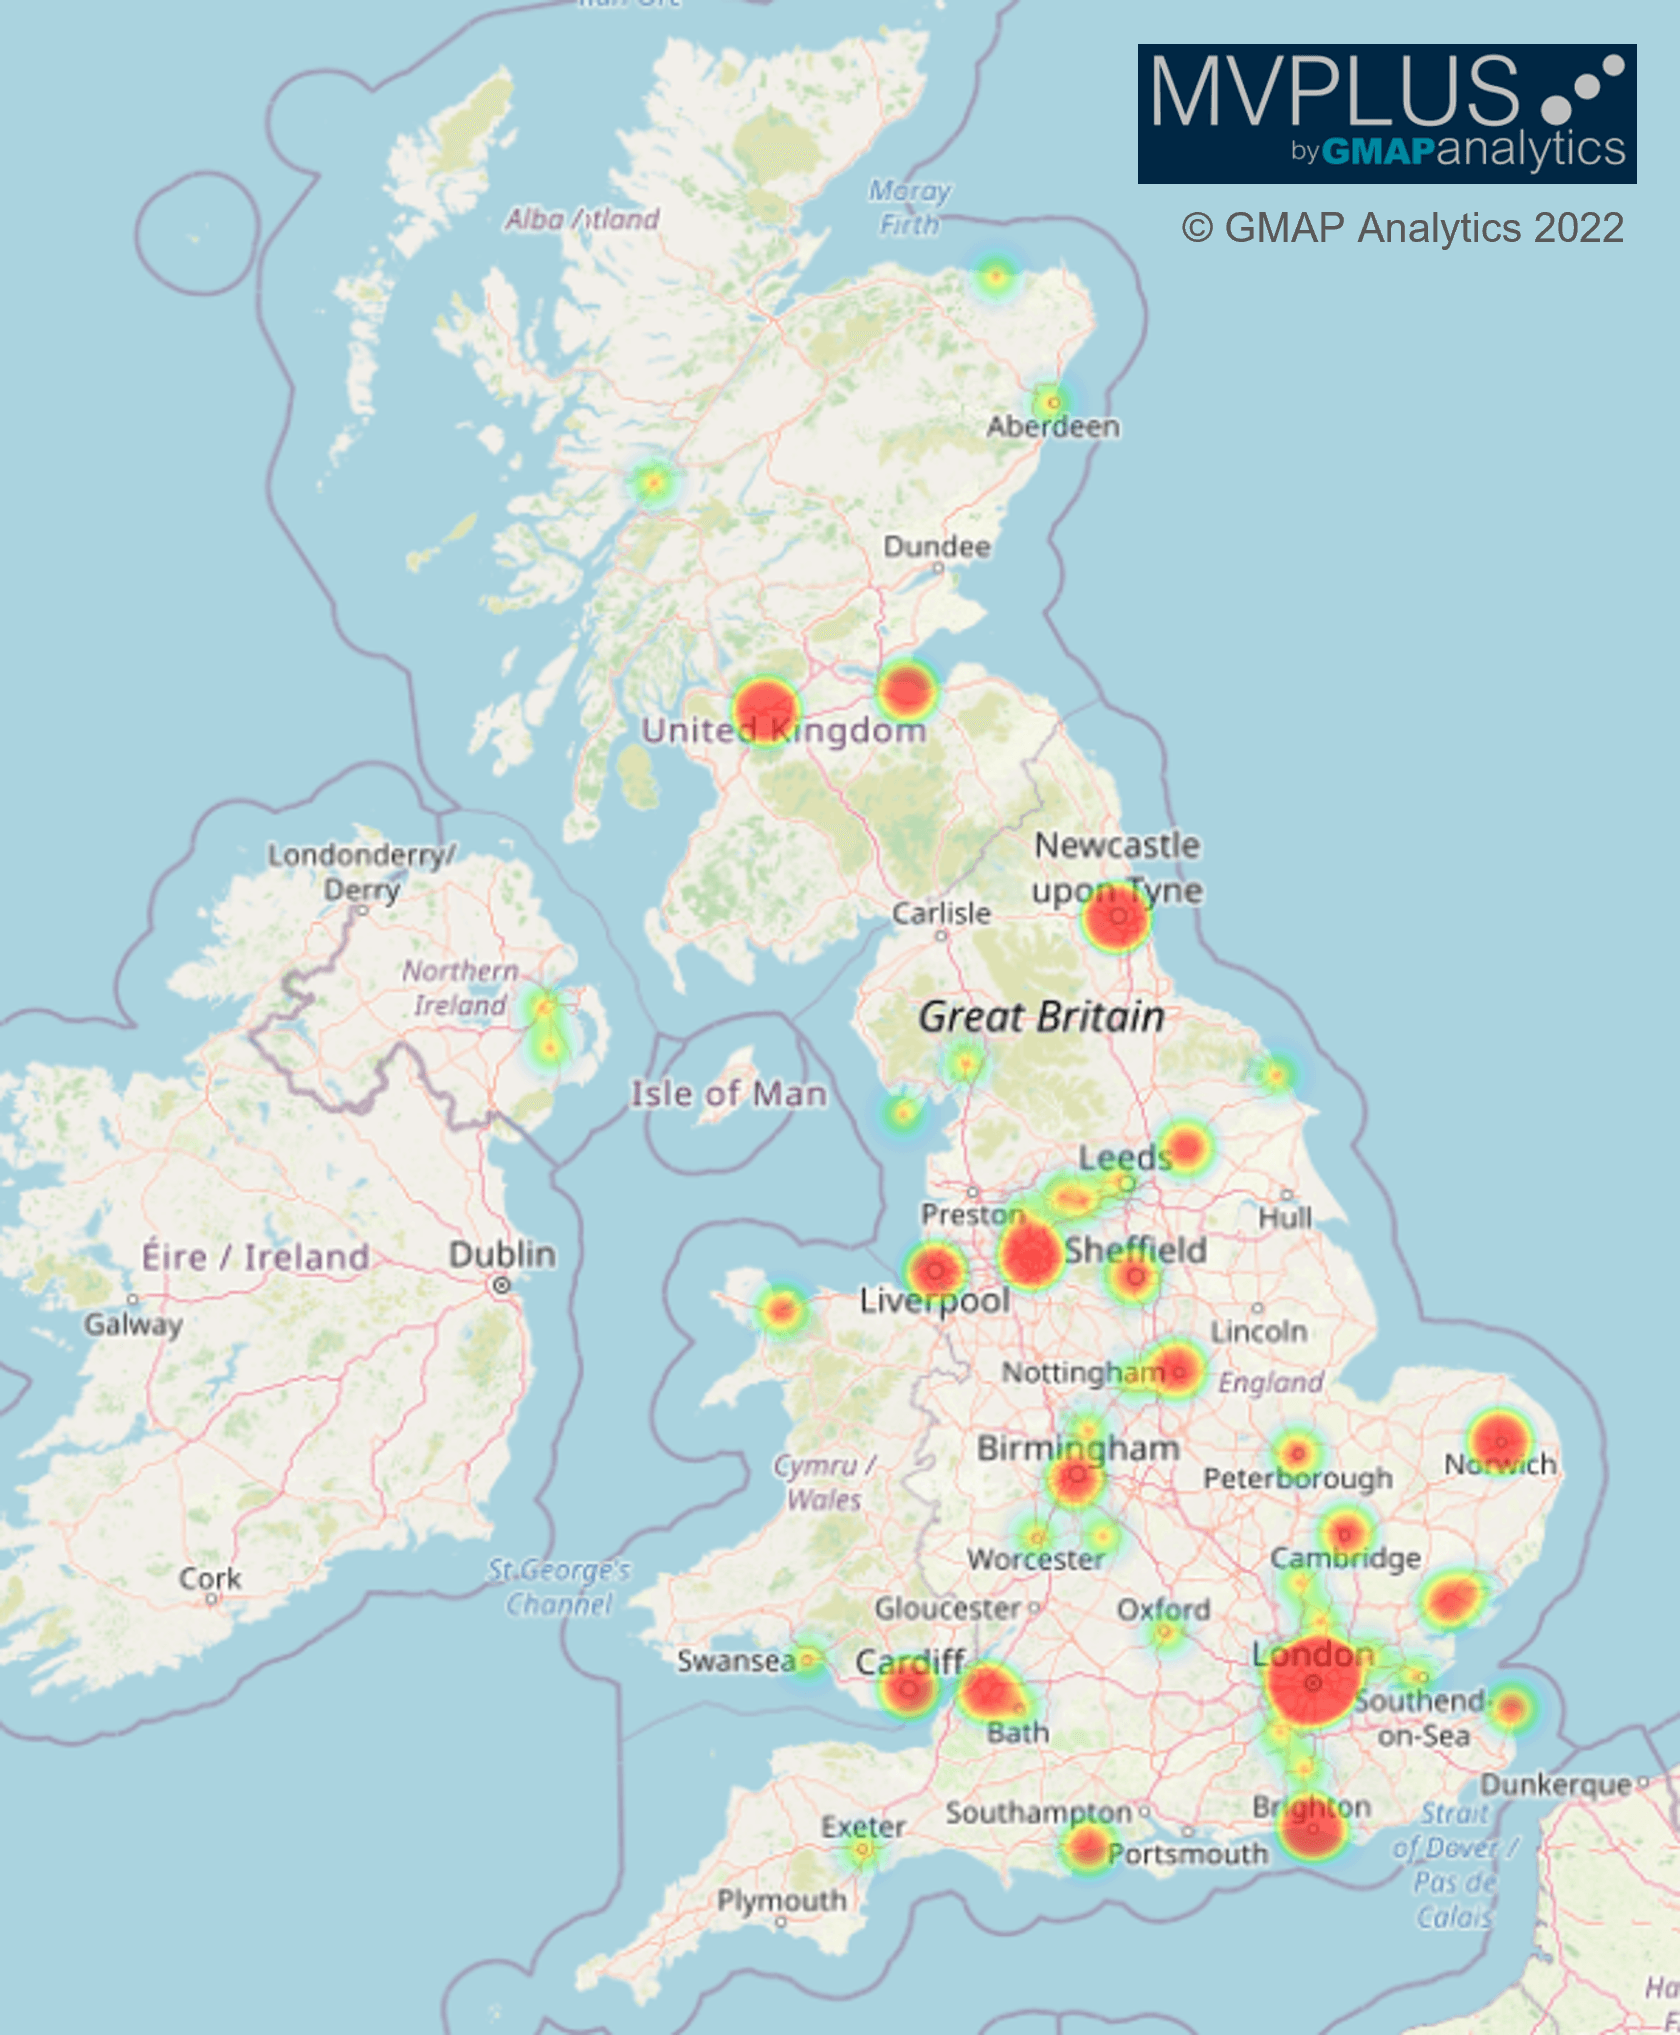 Leisure location data to find out where there are the most Vegan restaurant, cafe, and takeaway outlets in the UK are